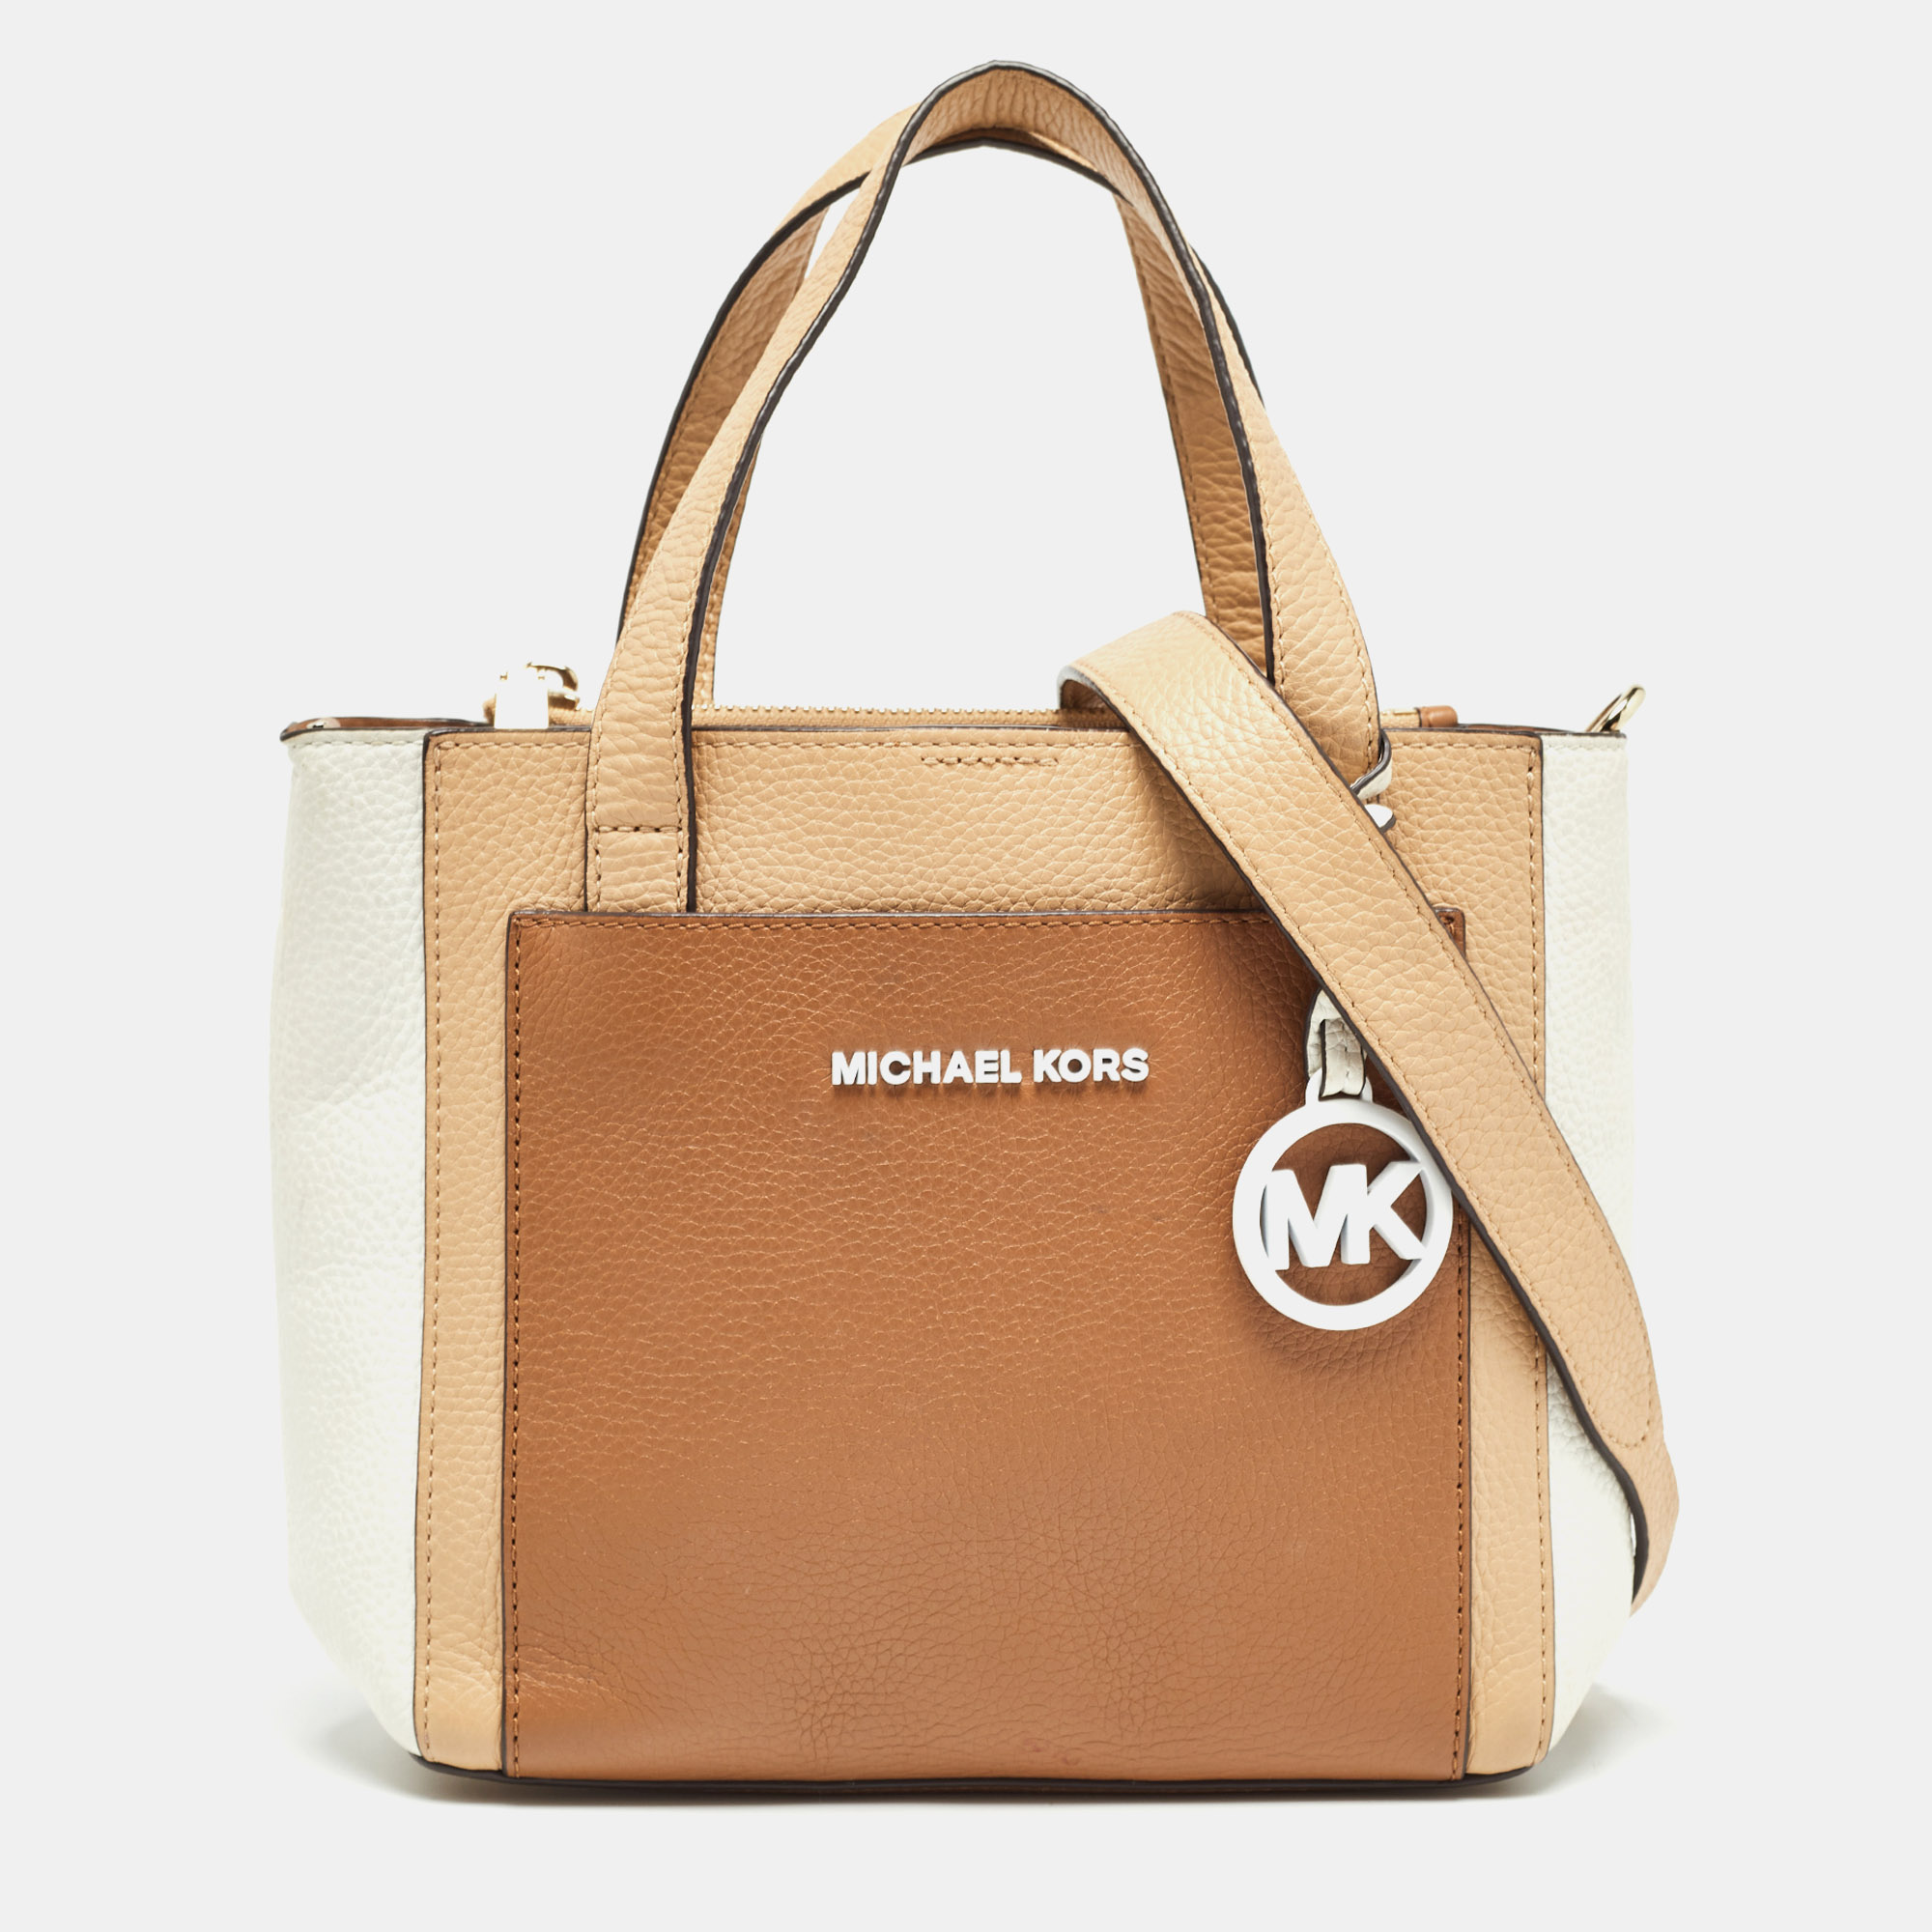 Michael kors tricolor leather small gemma tote